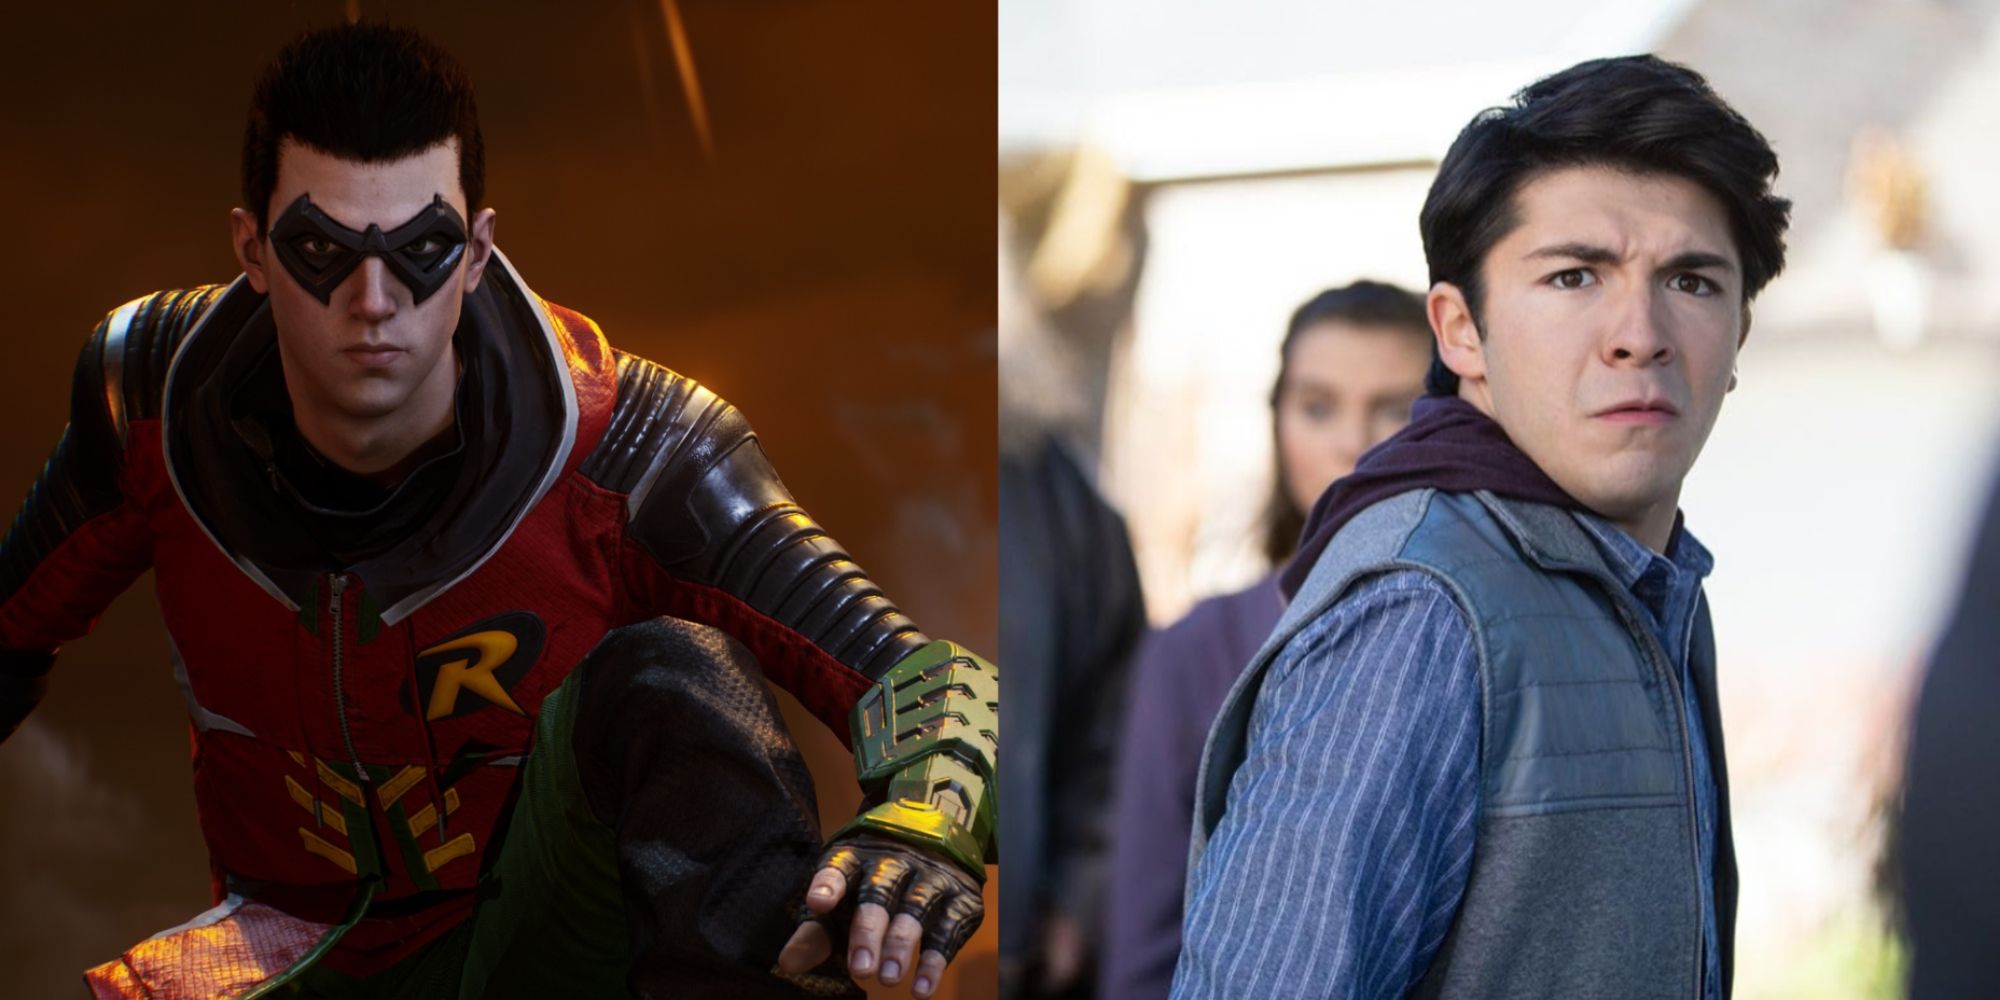 Split Image Of Robin From Gotham Knights And Dwight From Dwight In Shining Armor